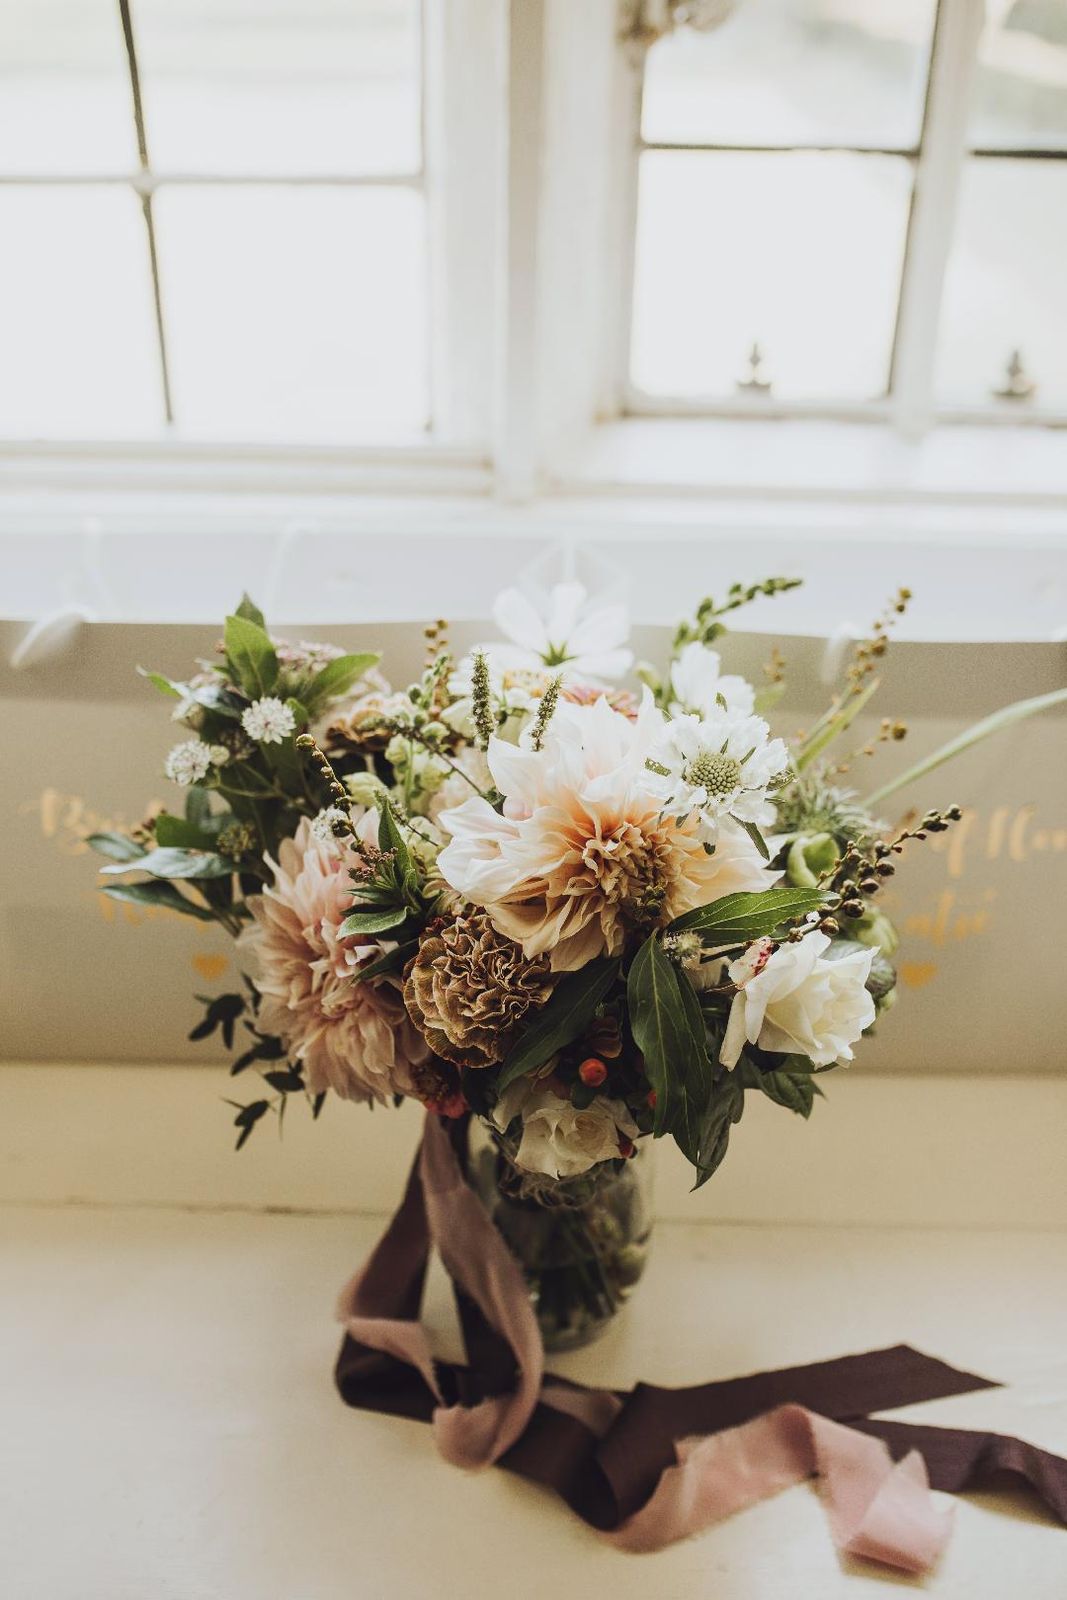 Image courtesy of Tilda Rose Floristry and Honeydew Moments